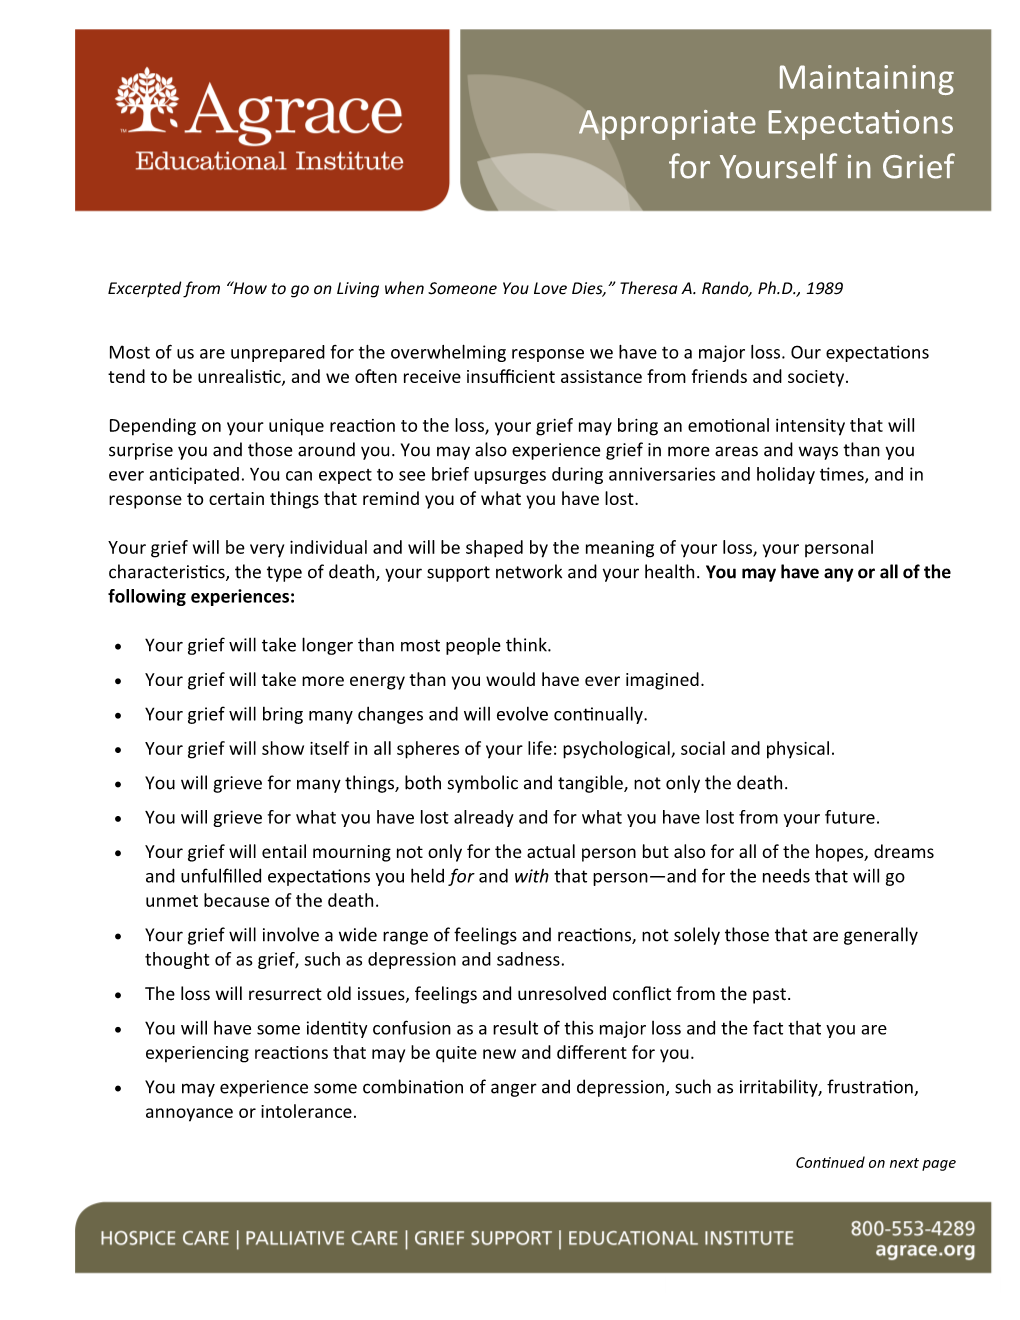 Maintaining Appropriate Expectations for Yourself in Grief